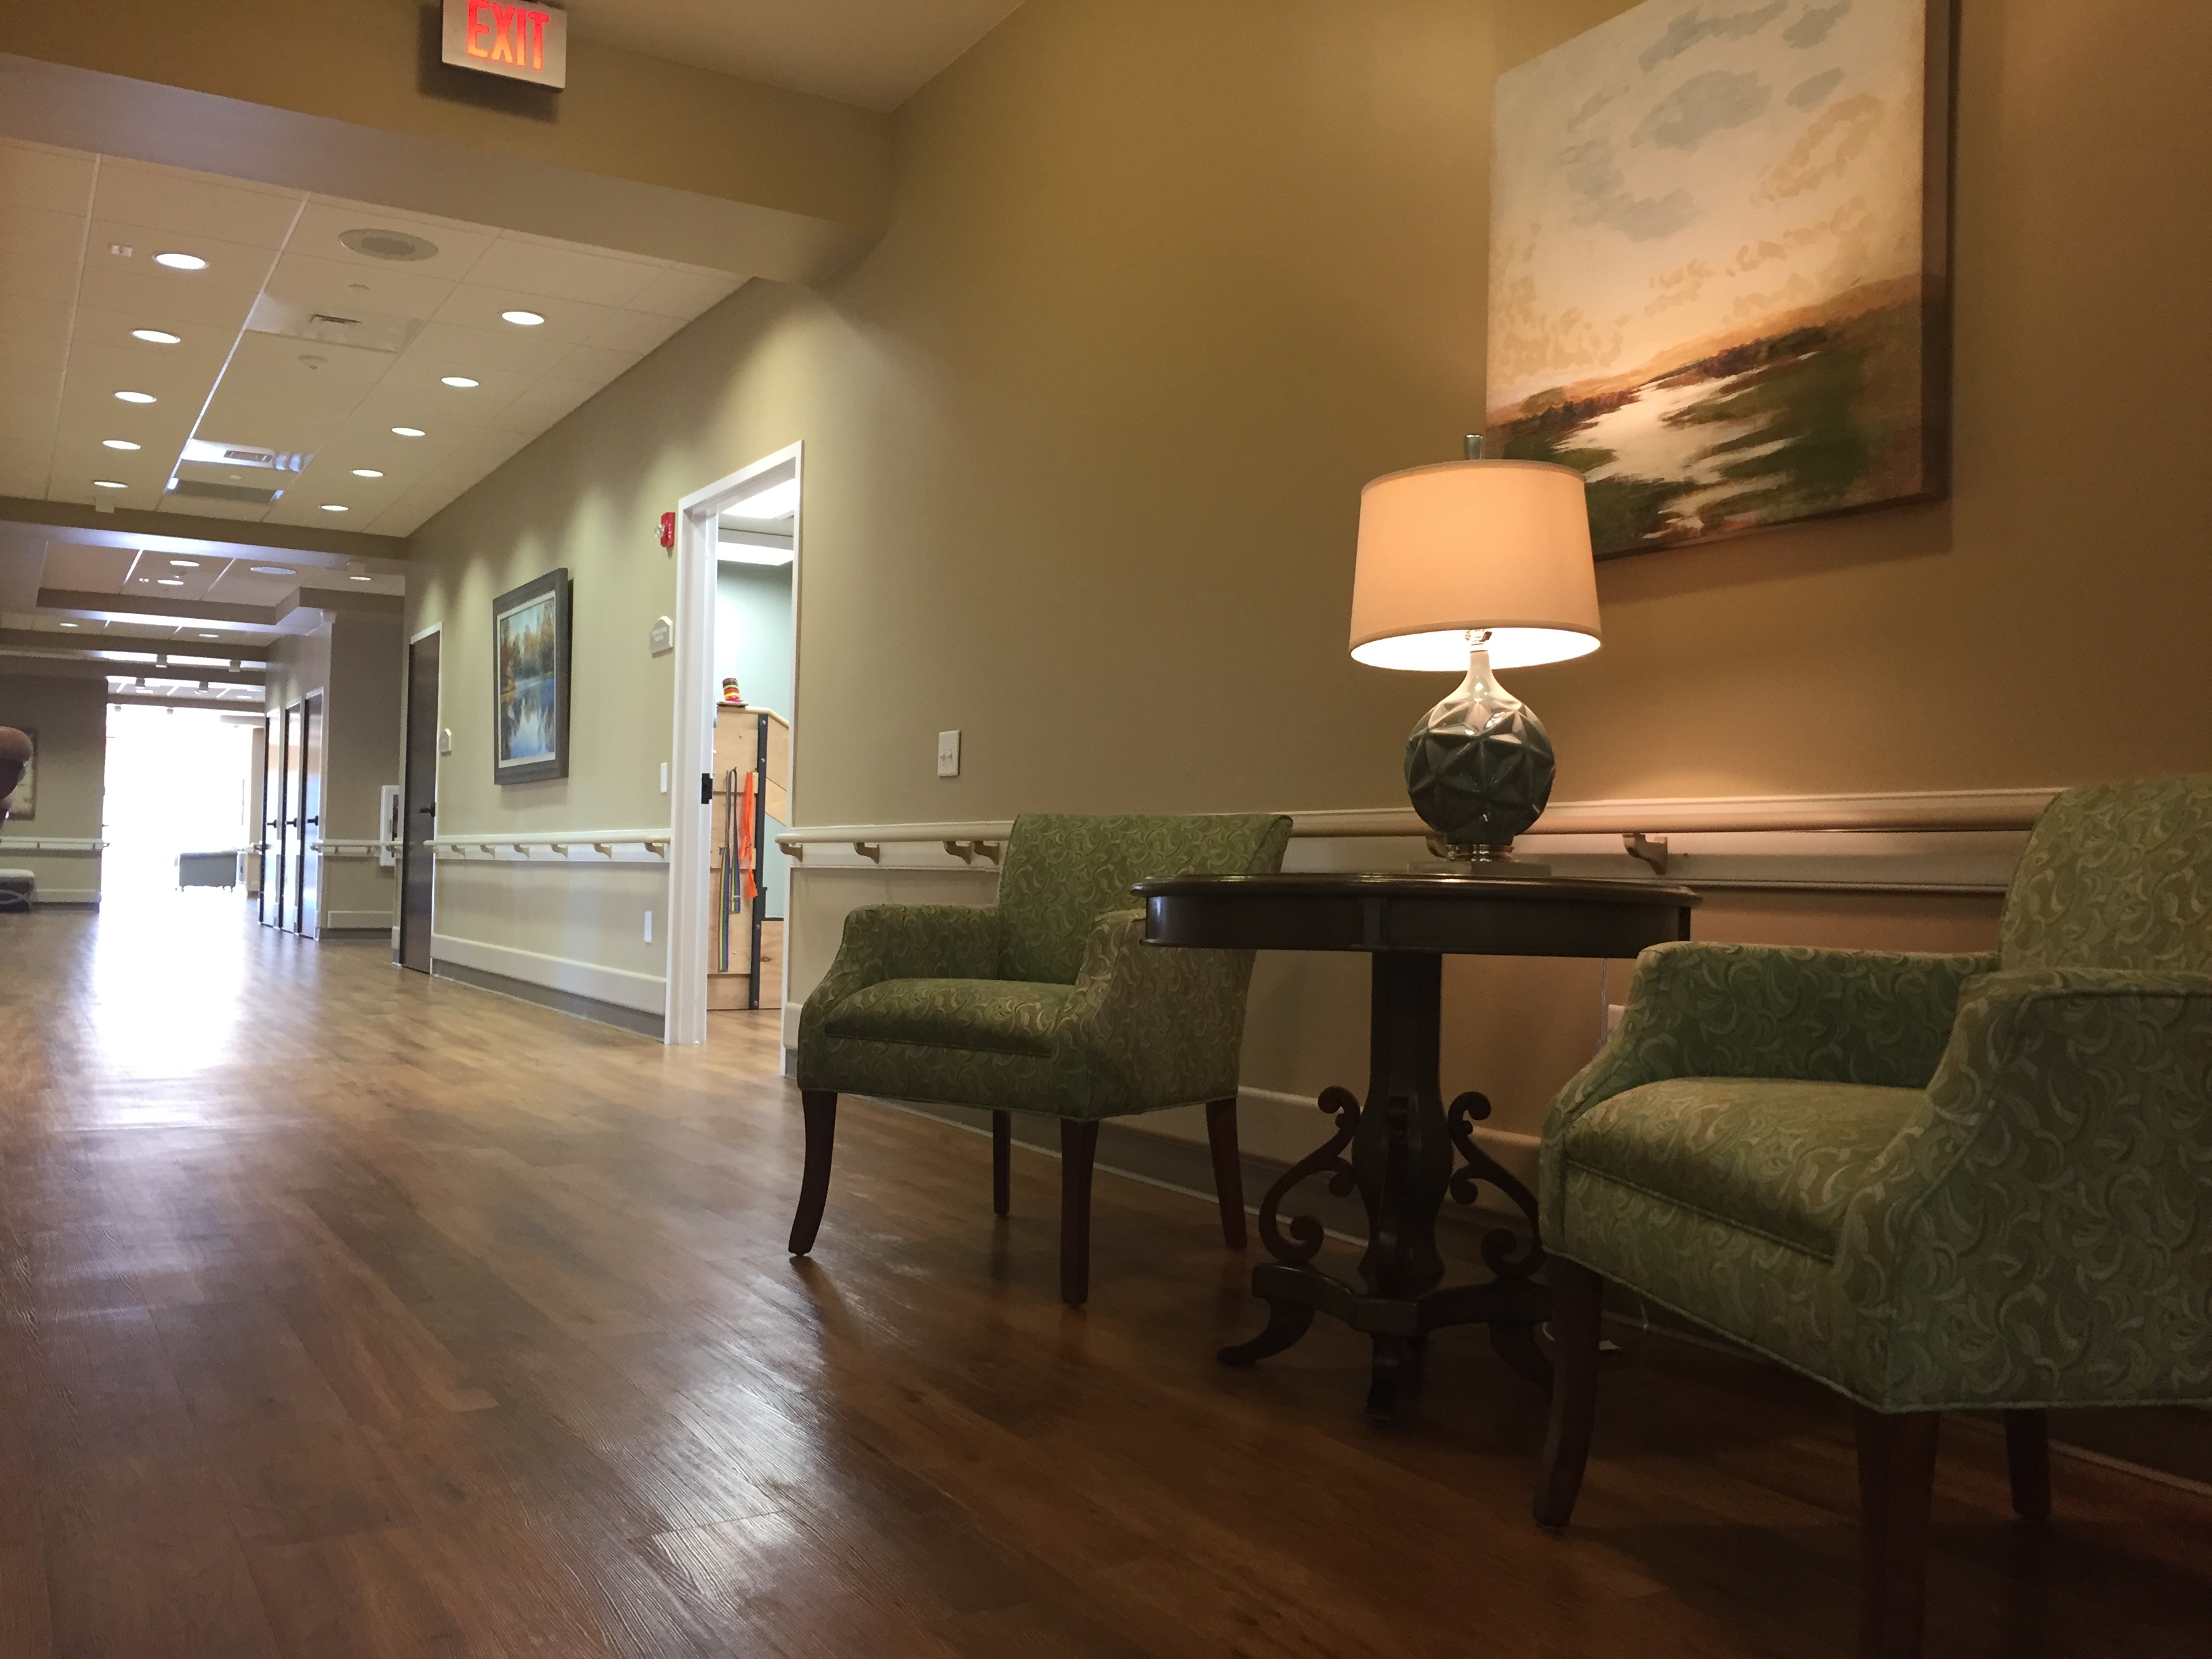 CHURCH HOME OPENS NEW LIFESPRING REHABILITATION ADDITION